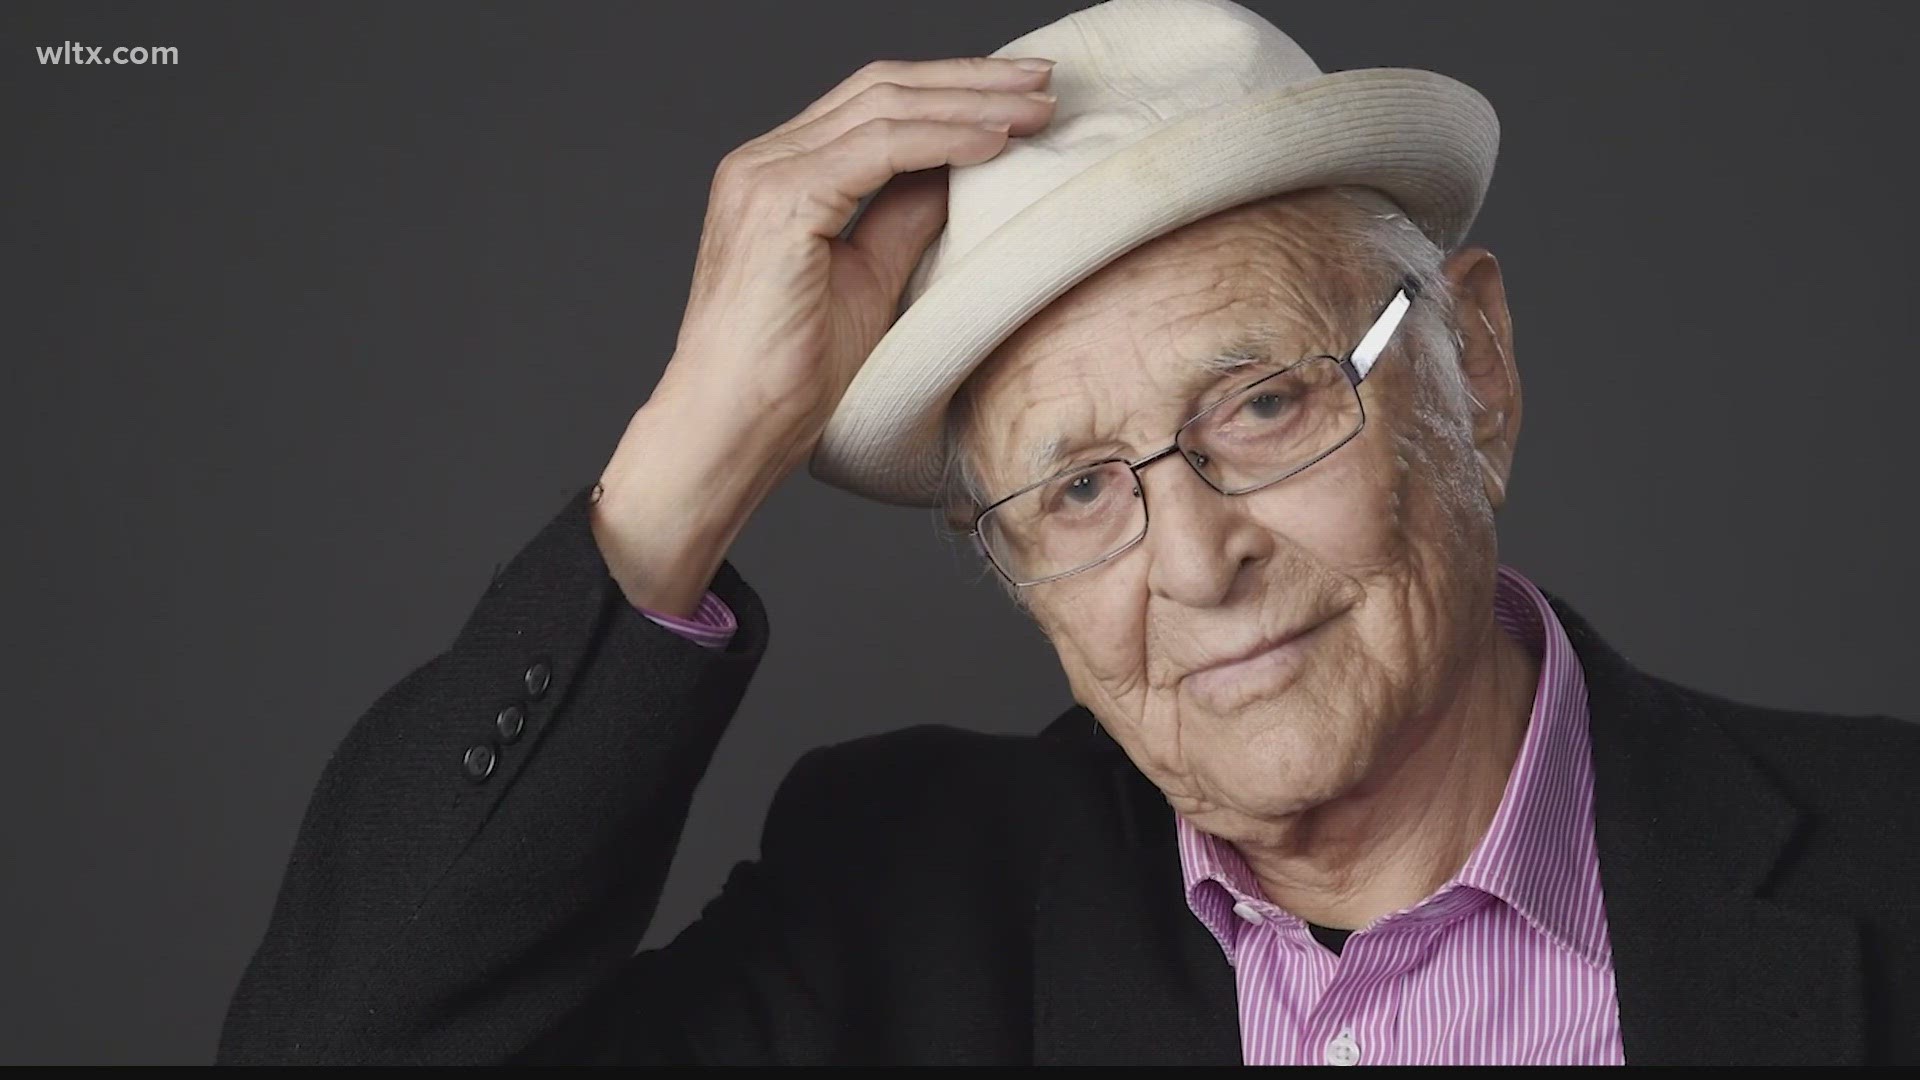 Norman Lear was best known for his 1970s sitcoms including “All in the Family,” “Sandford and Son,” “One Day at a Time,” The Jeffersons” and “Good Times.”